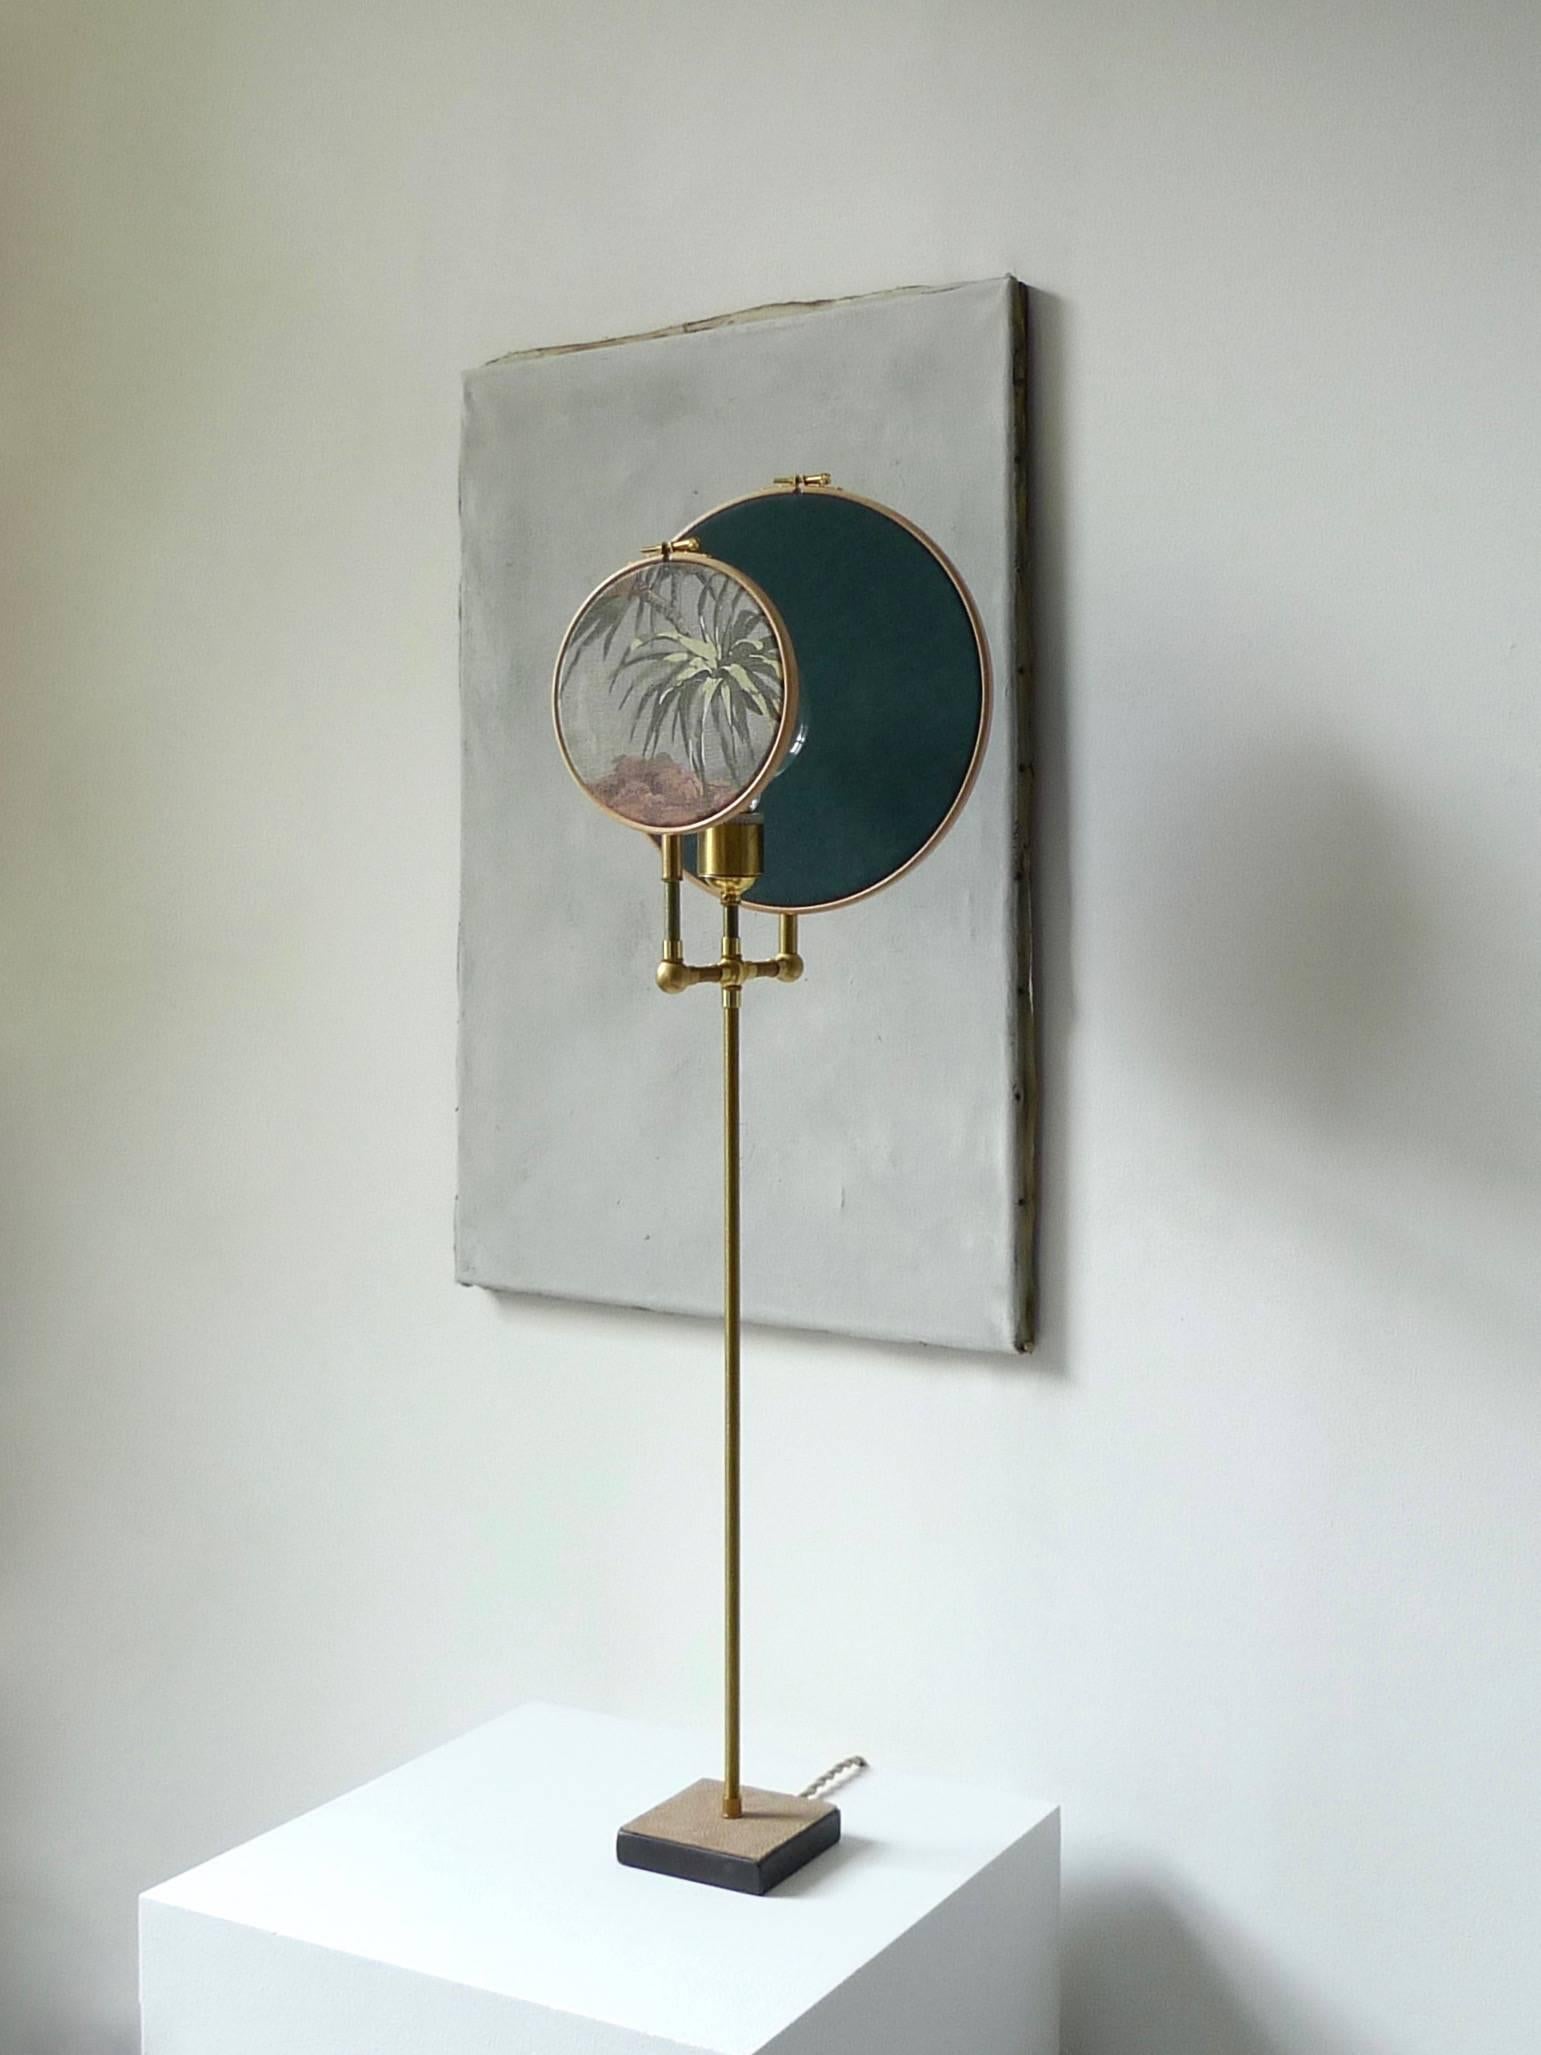 Light object, floor lamp, circle blue grey
Handmade in brass, leather, wood, hand printed and painted linen.
A dimmer is inlaid with leather
Dimensions: H 83 x W 27 x D 16 cm
The design artwork is meticulously handcrafted in a limited series,